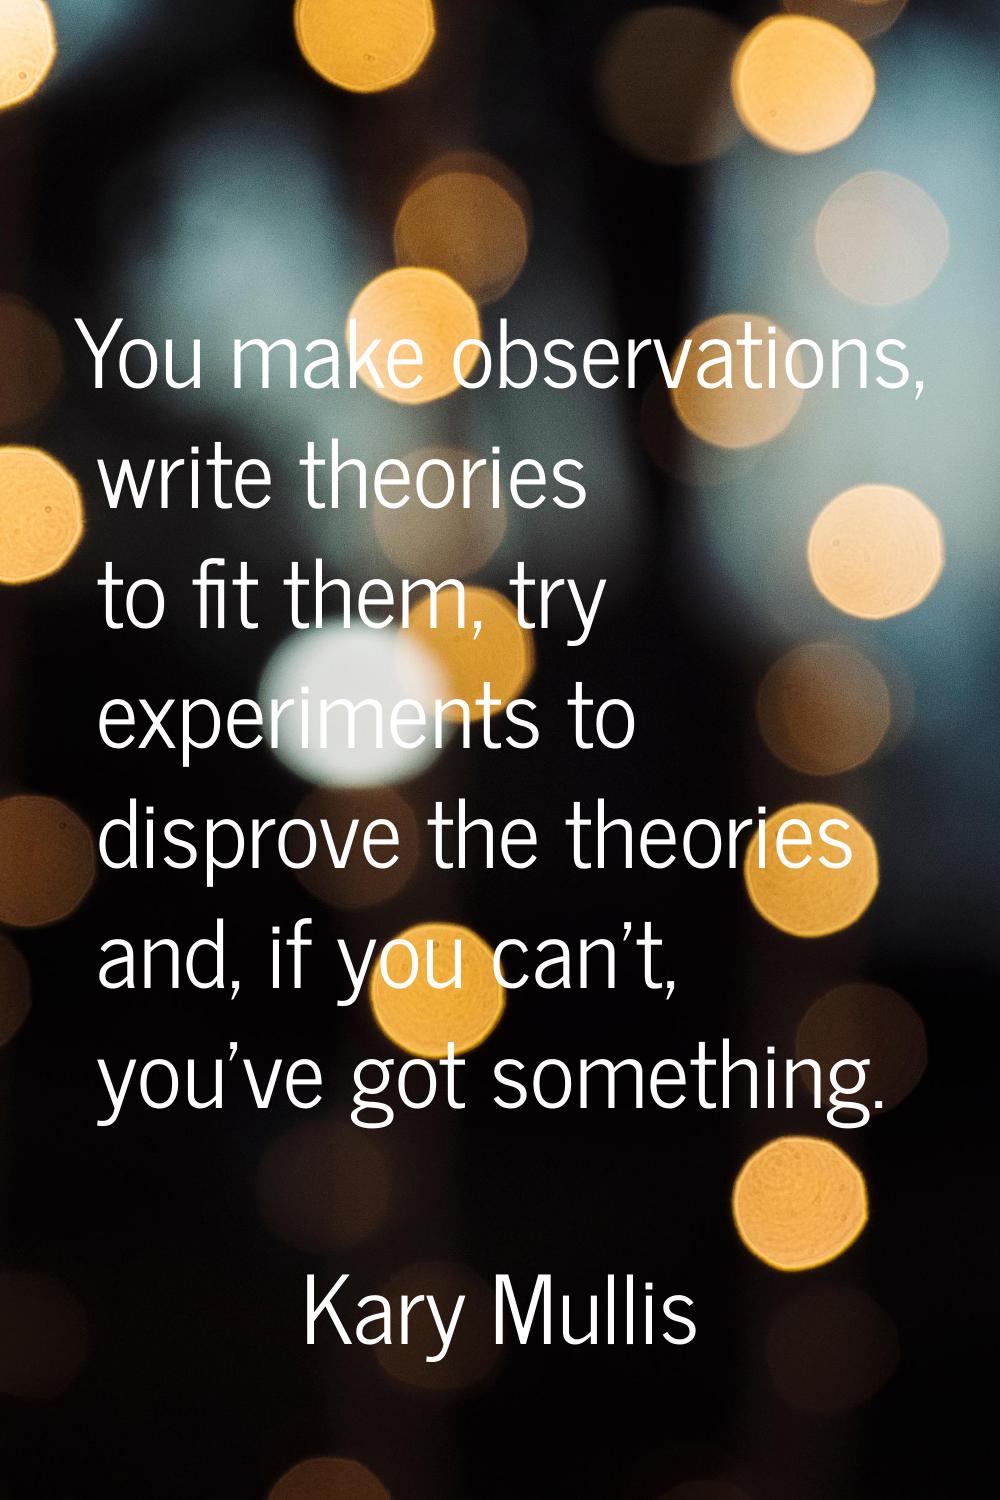 You make observations, write theories to fit them, try experiments to disprove the theories and, if